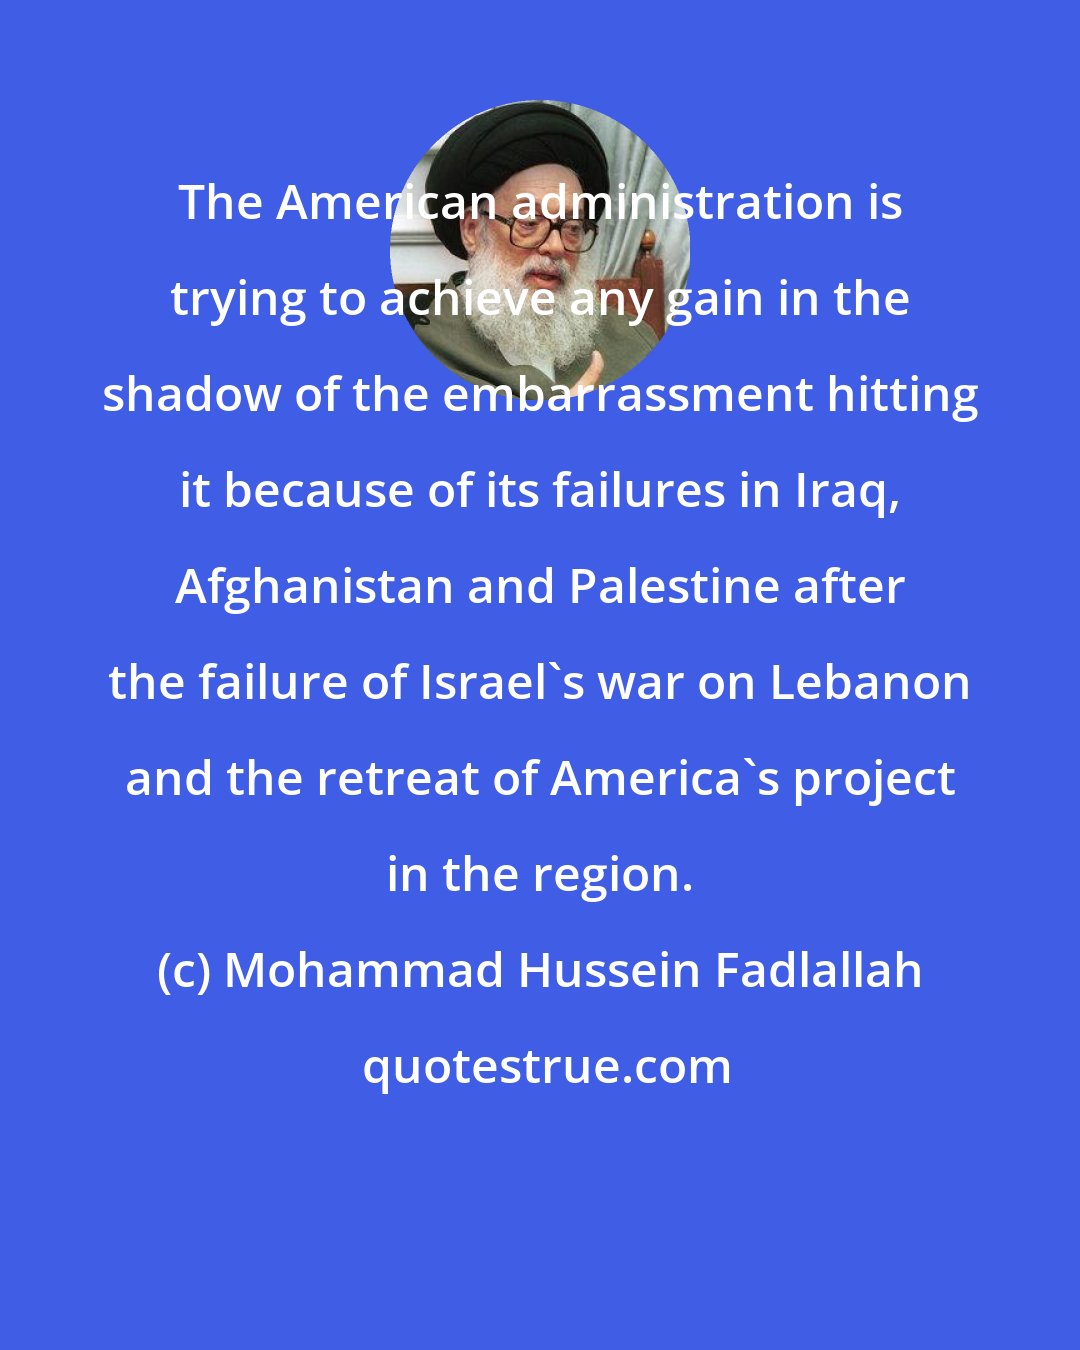 Mohammad Hussein Fadlallah: The American administration is trying to achieve any gain in the shadow of the embarrassment hitting it because of its failures in Iraq, Afghanistan and Palestine after the failure of Israel's war on Lebanon and the retreat of America's project in the region.